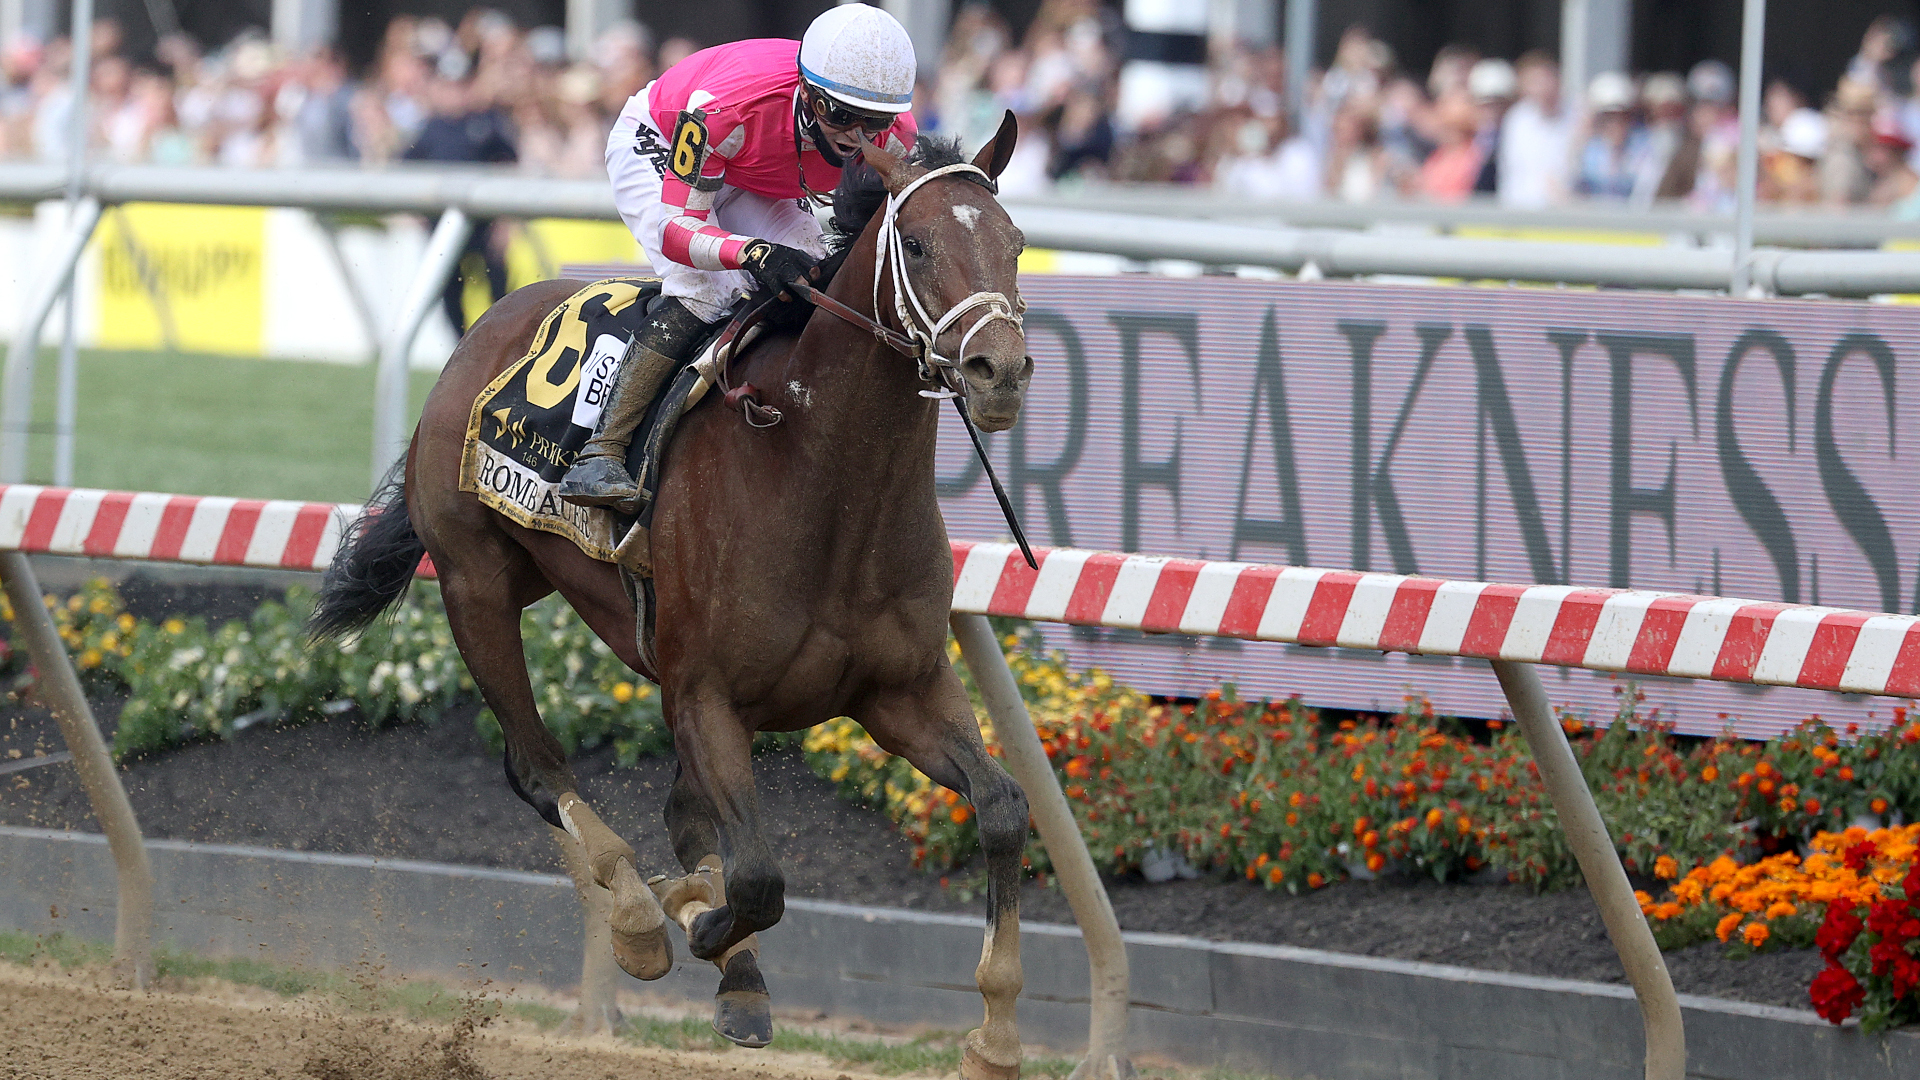 2022 Preakness Stakes live stream: how to watch, start time, TV channel,  odds, horses | What Hi-Fi?